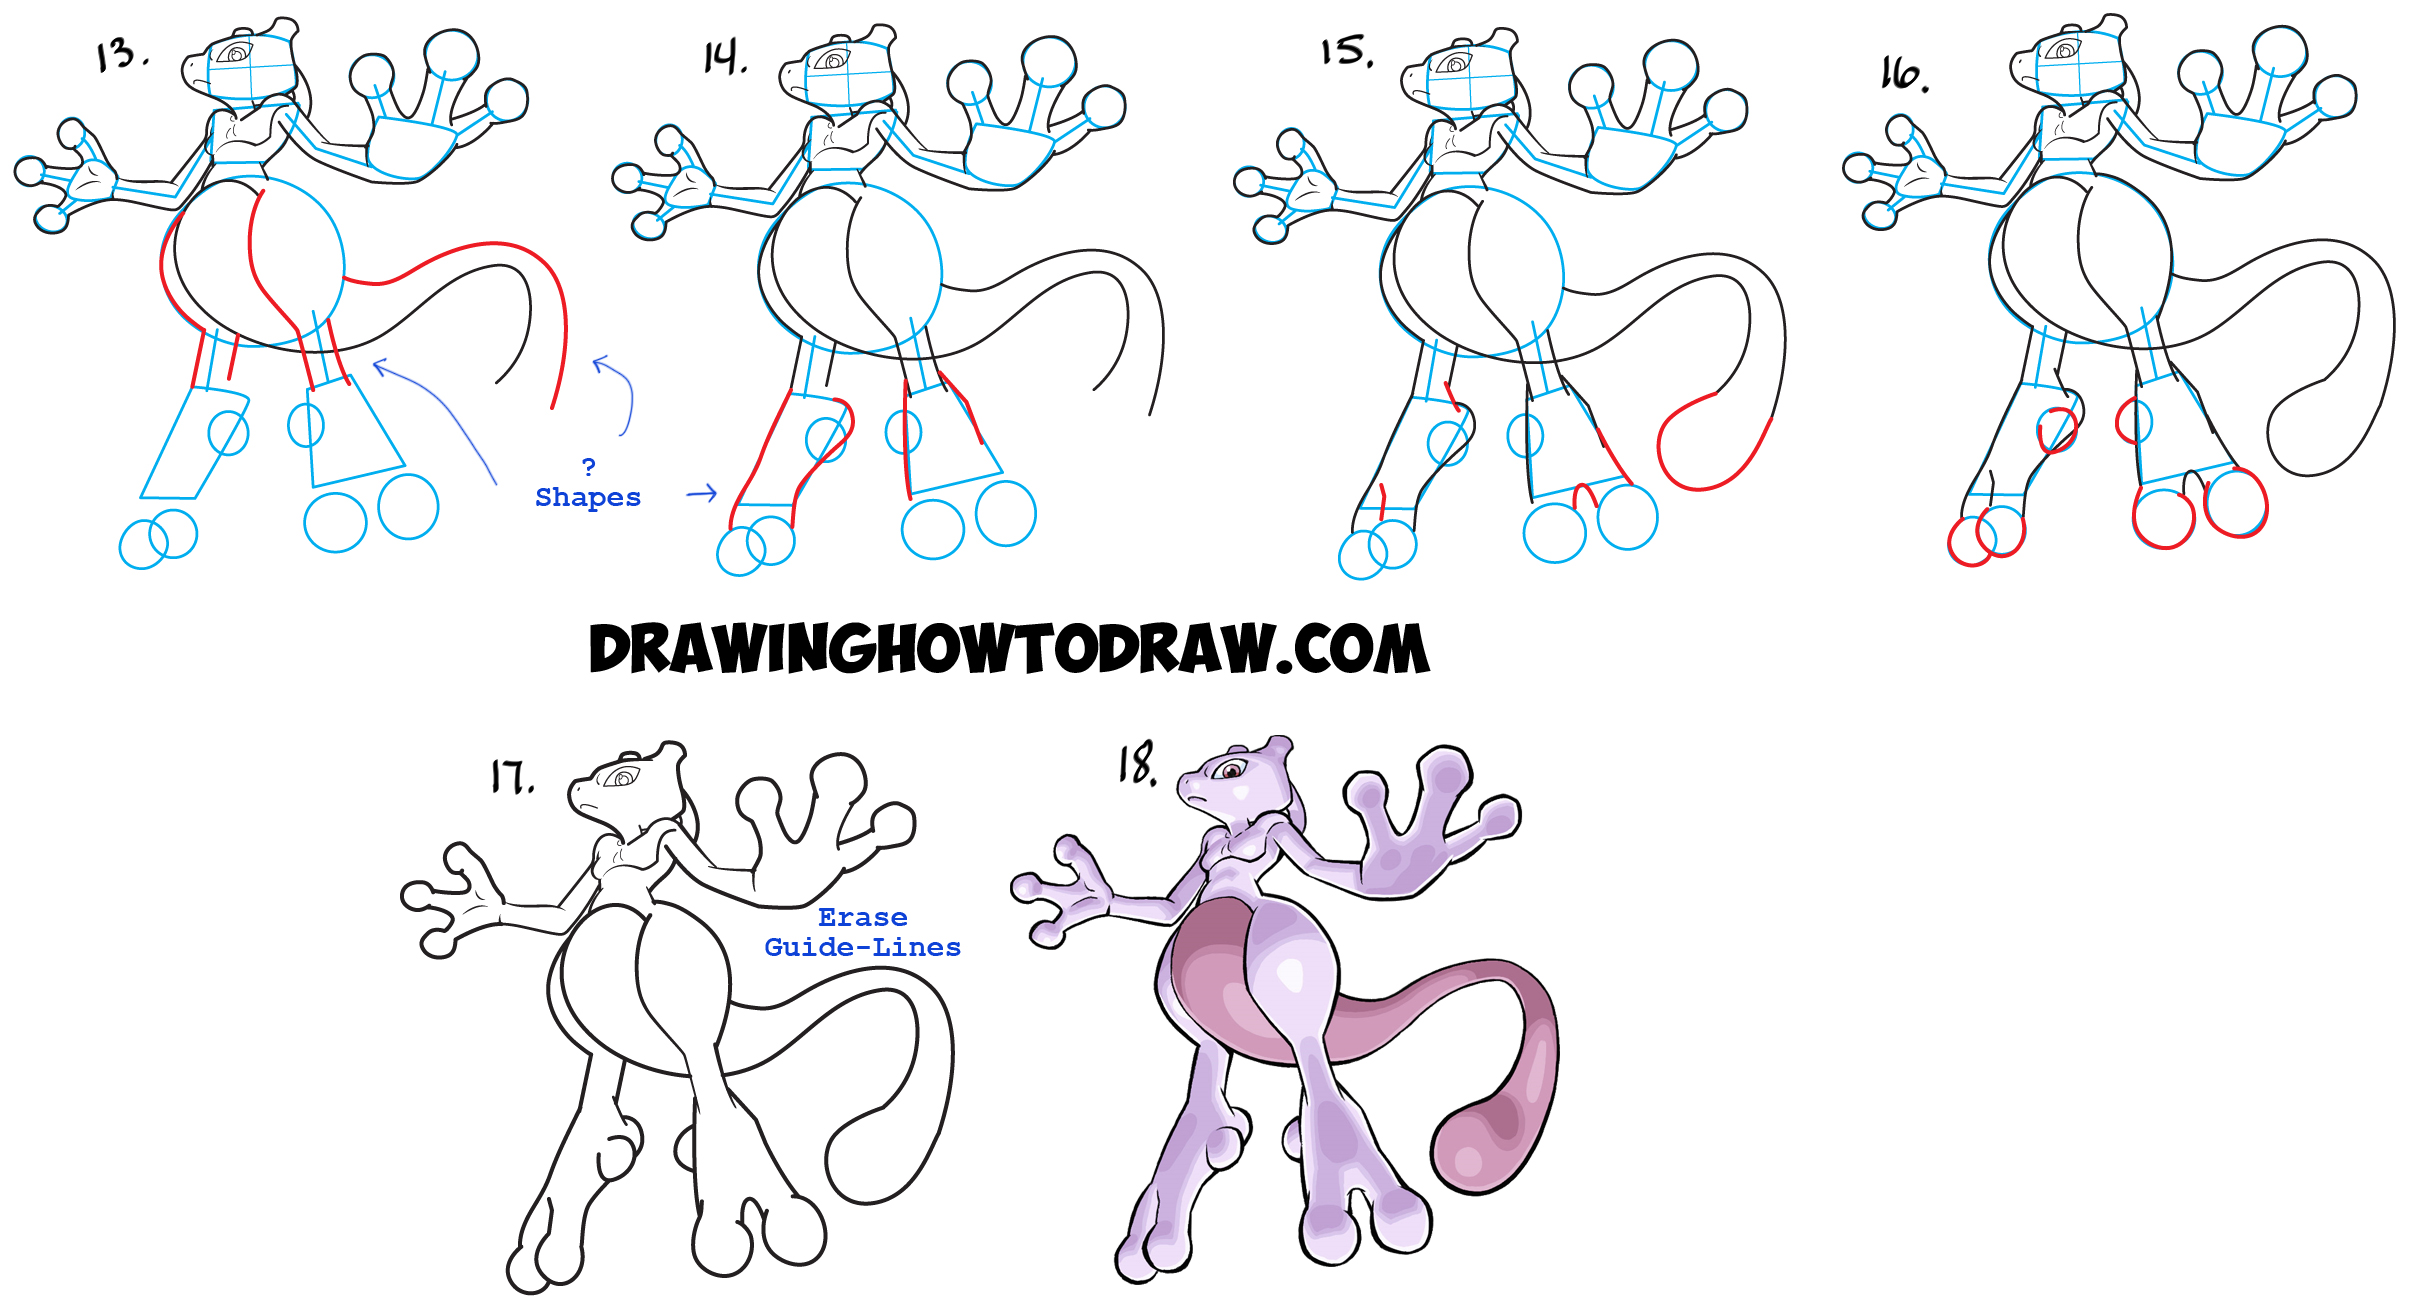 How to Draw MewTwo